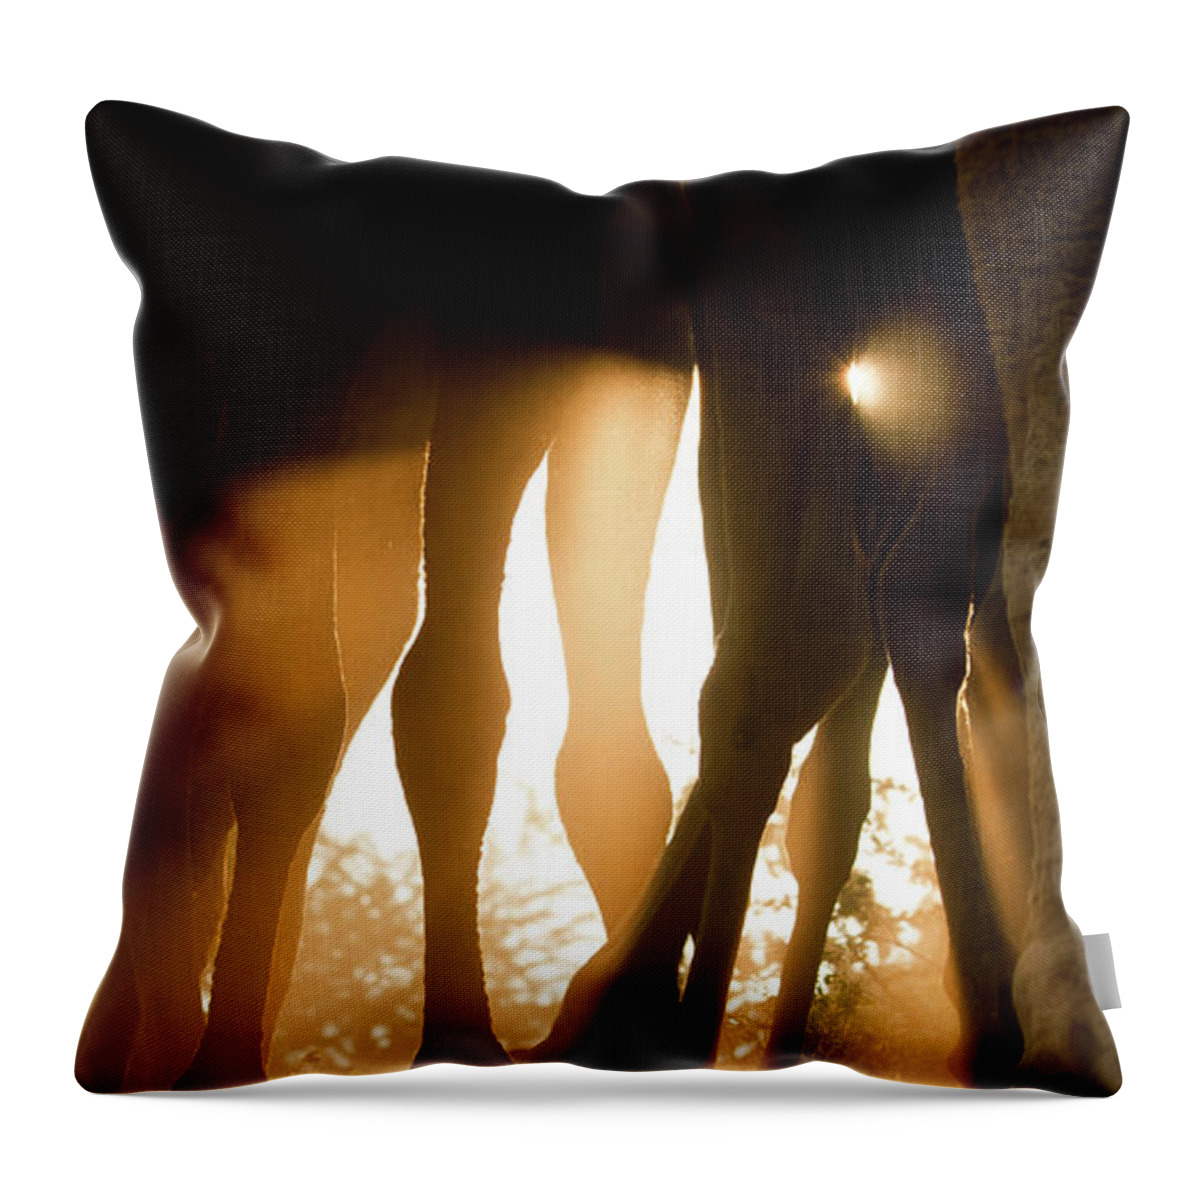 Animal Themes Throw Pillow featuring the photograph Camels At Sunrise, Pushkar by © Chaitanya Deshpande